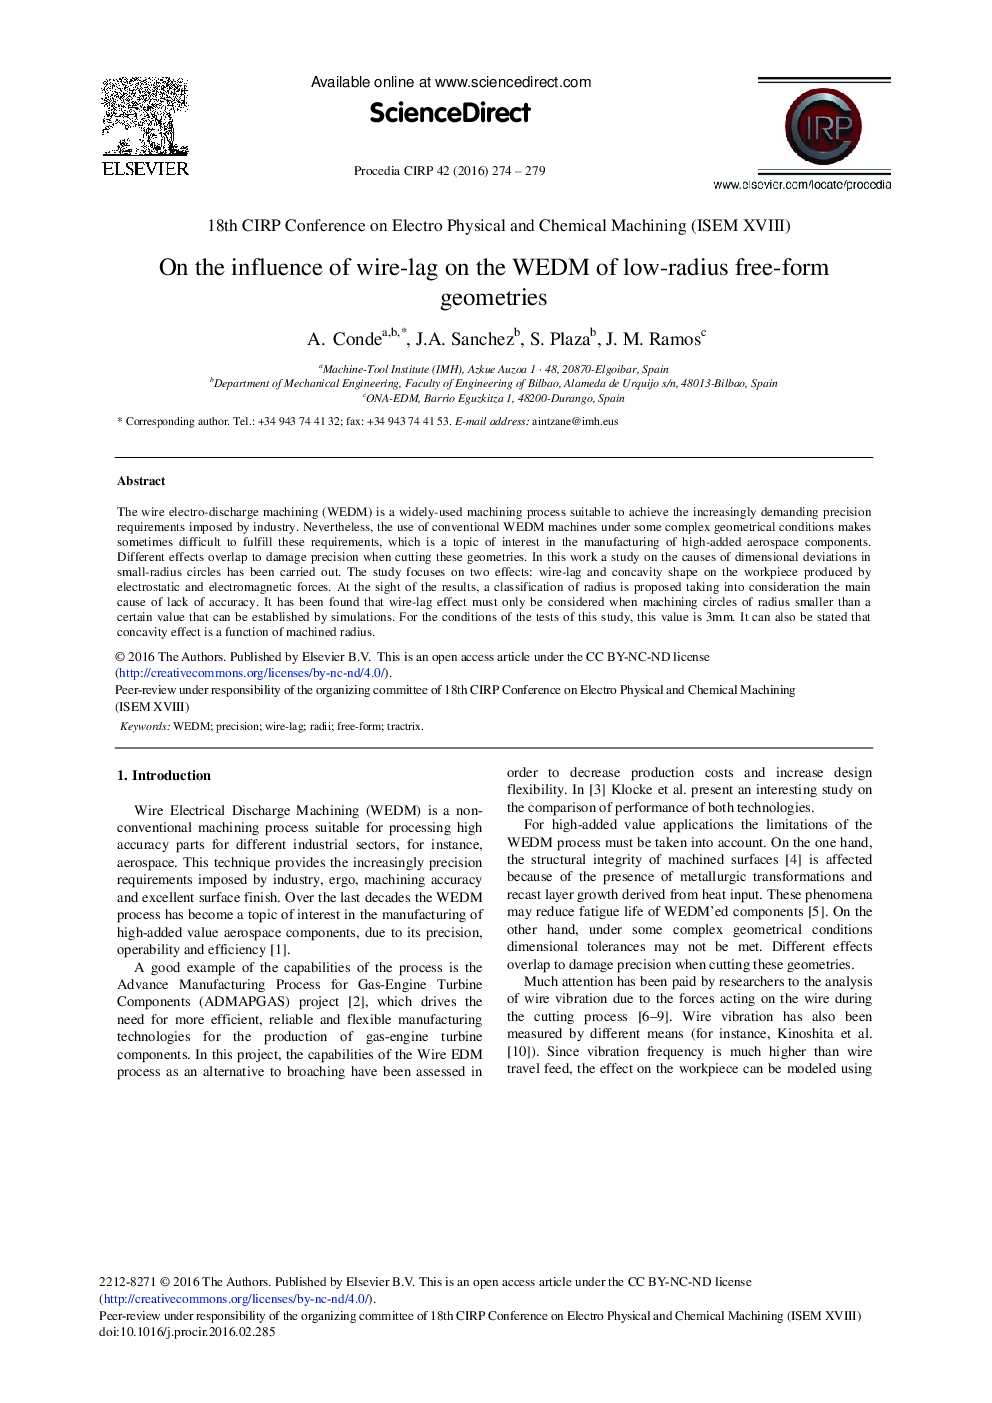 On the Influence of Wire-lag on the WEDM of Low-radius Free-form Geometries 